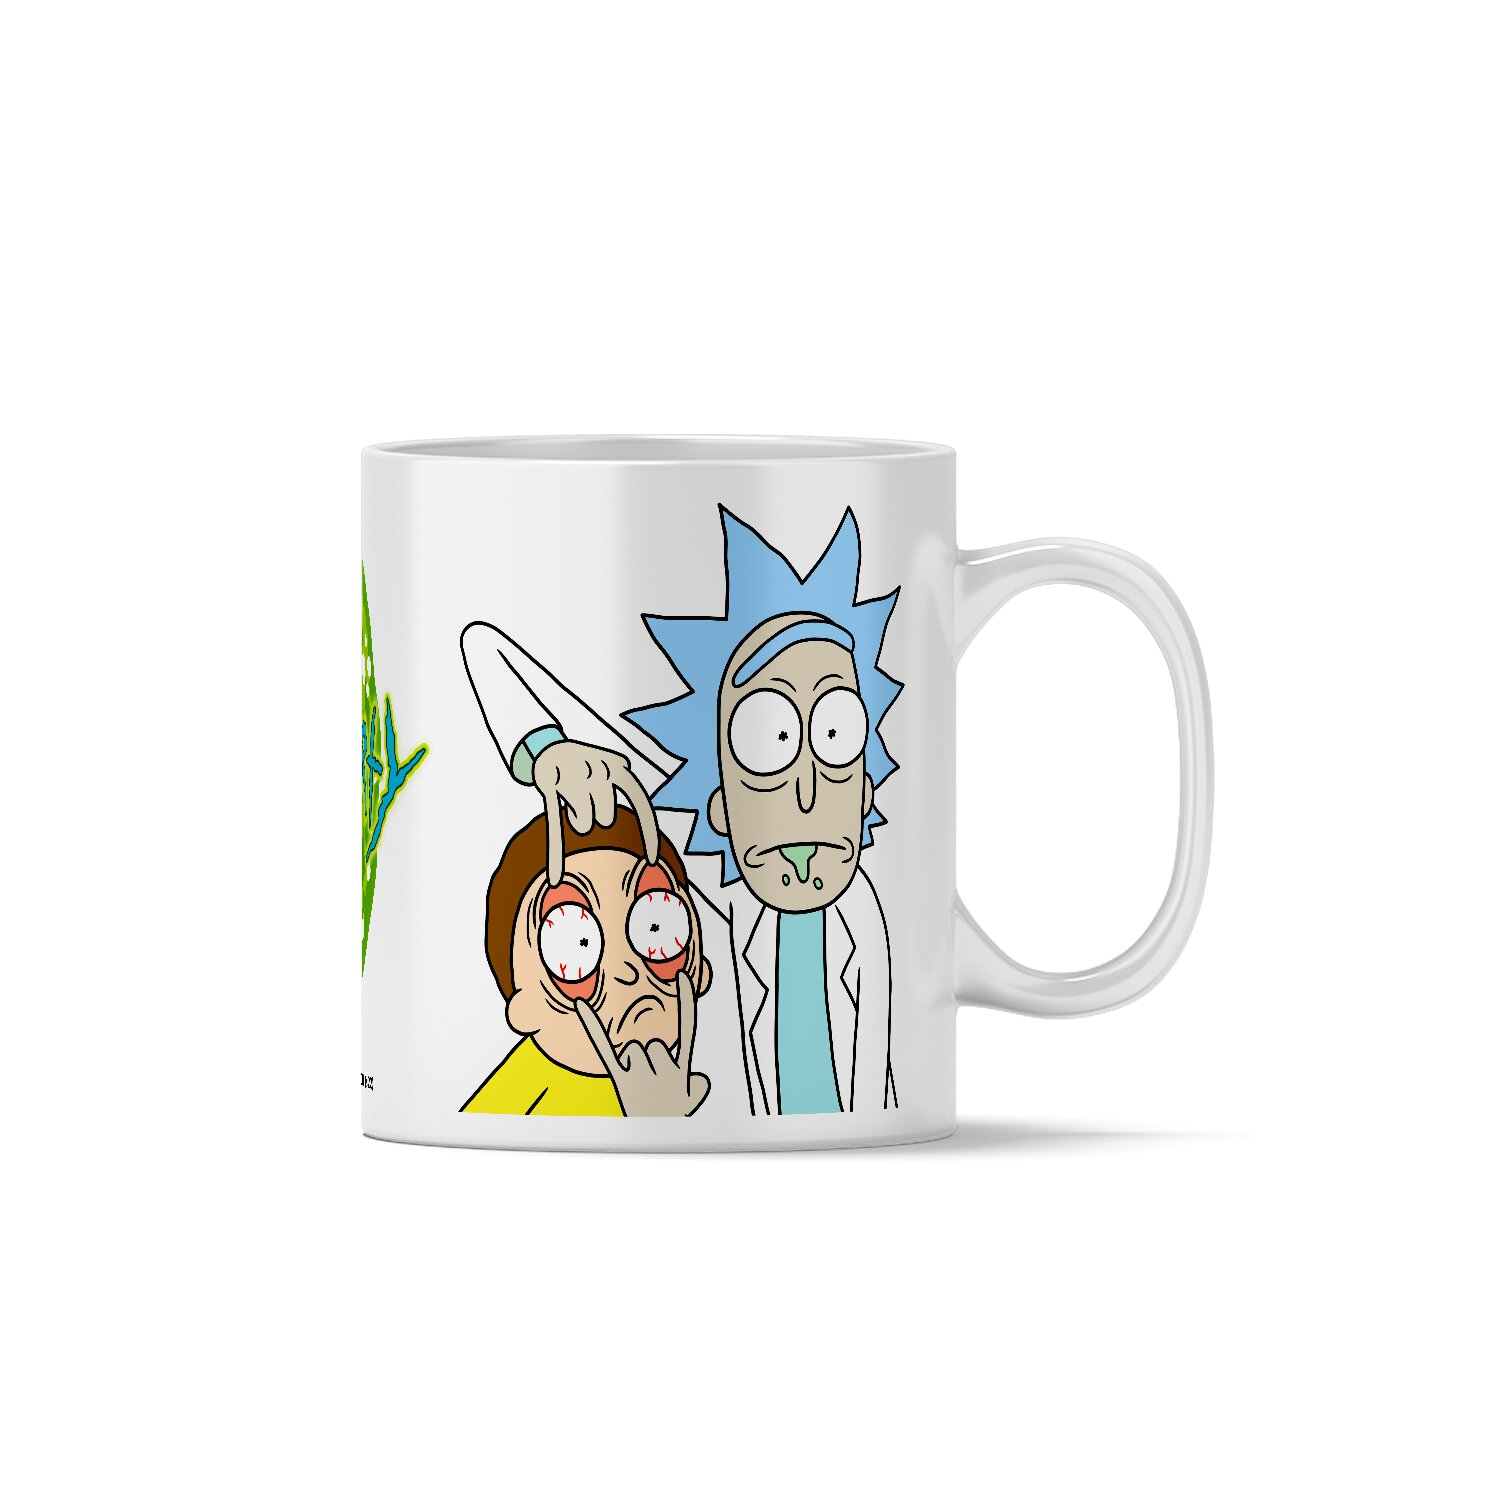 Rick and Morty Muster 007 330ml Morty Kaffee- und Teebecher